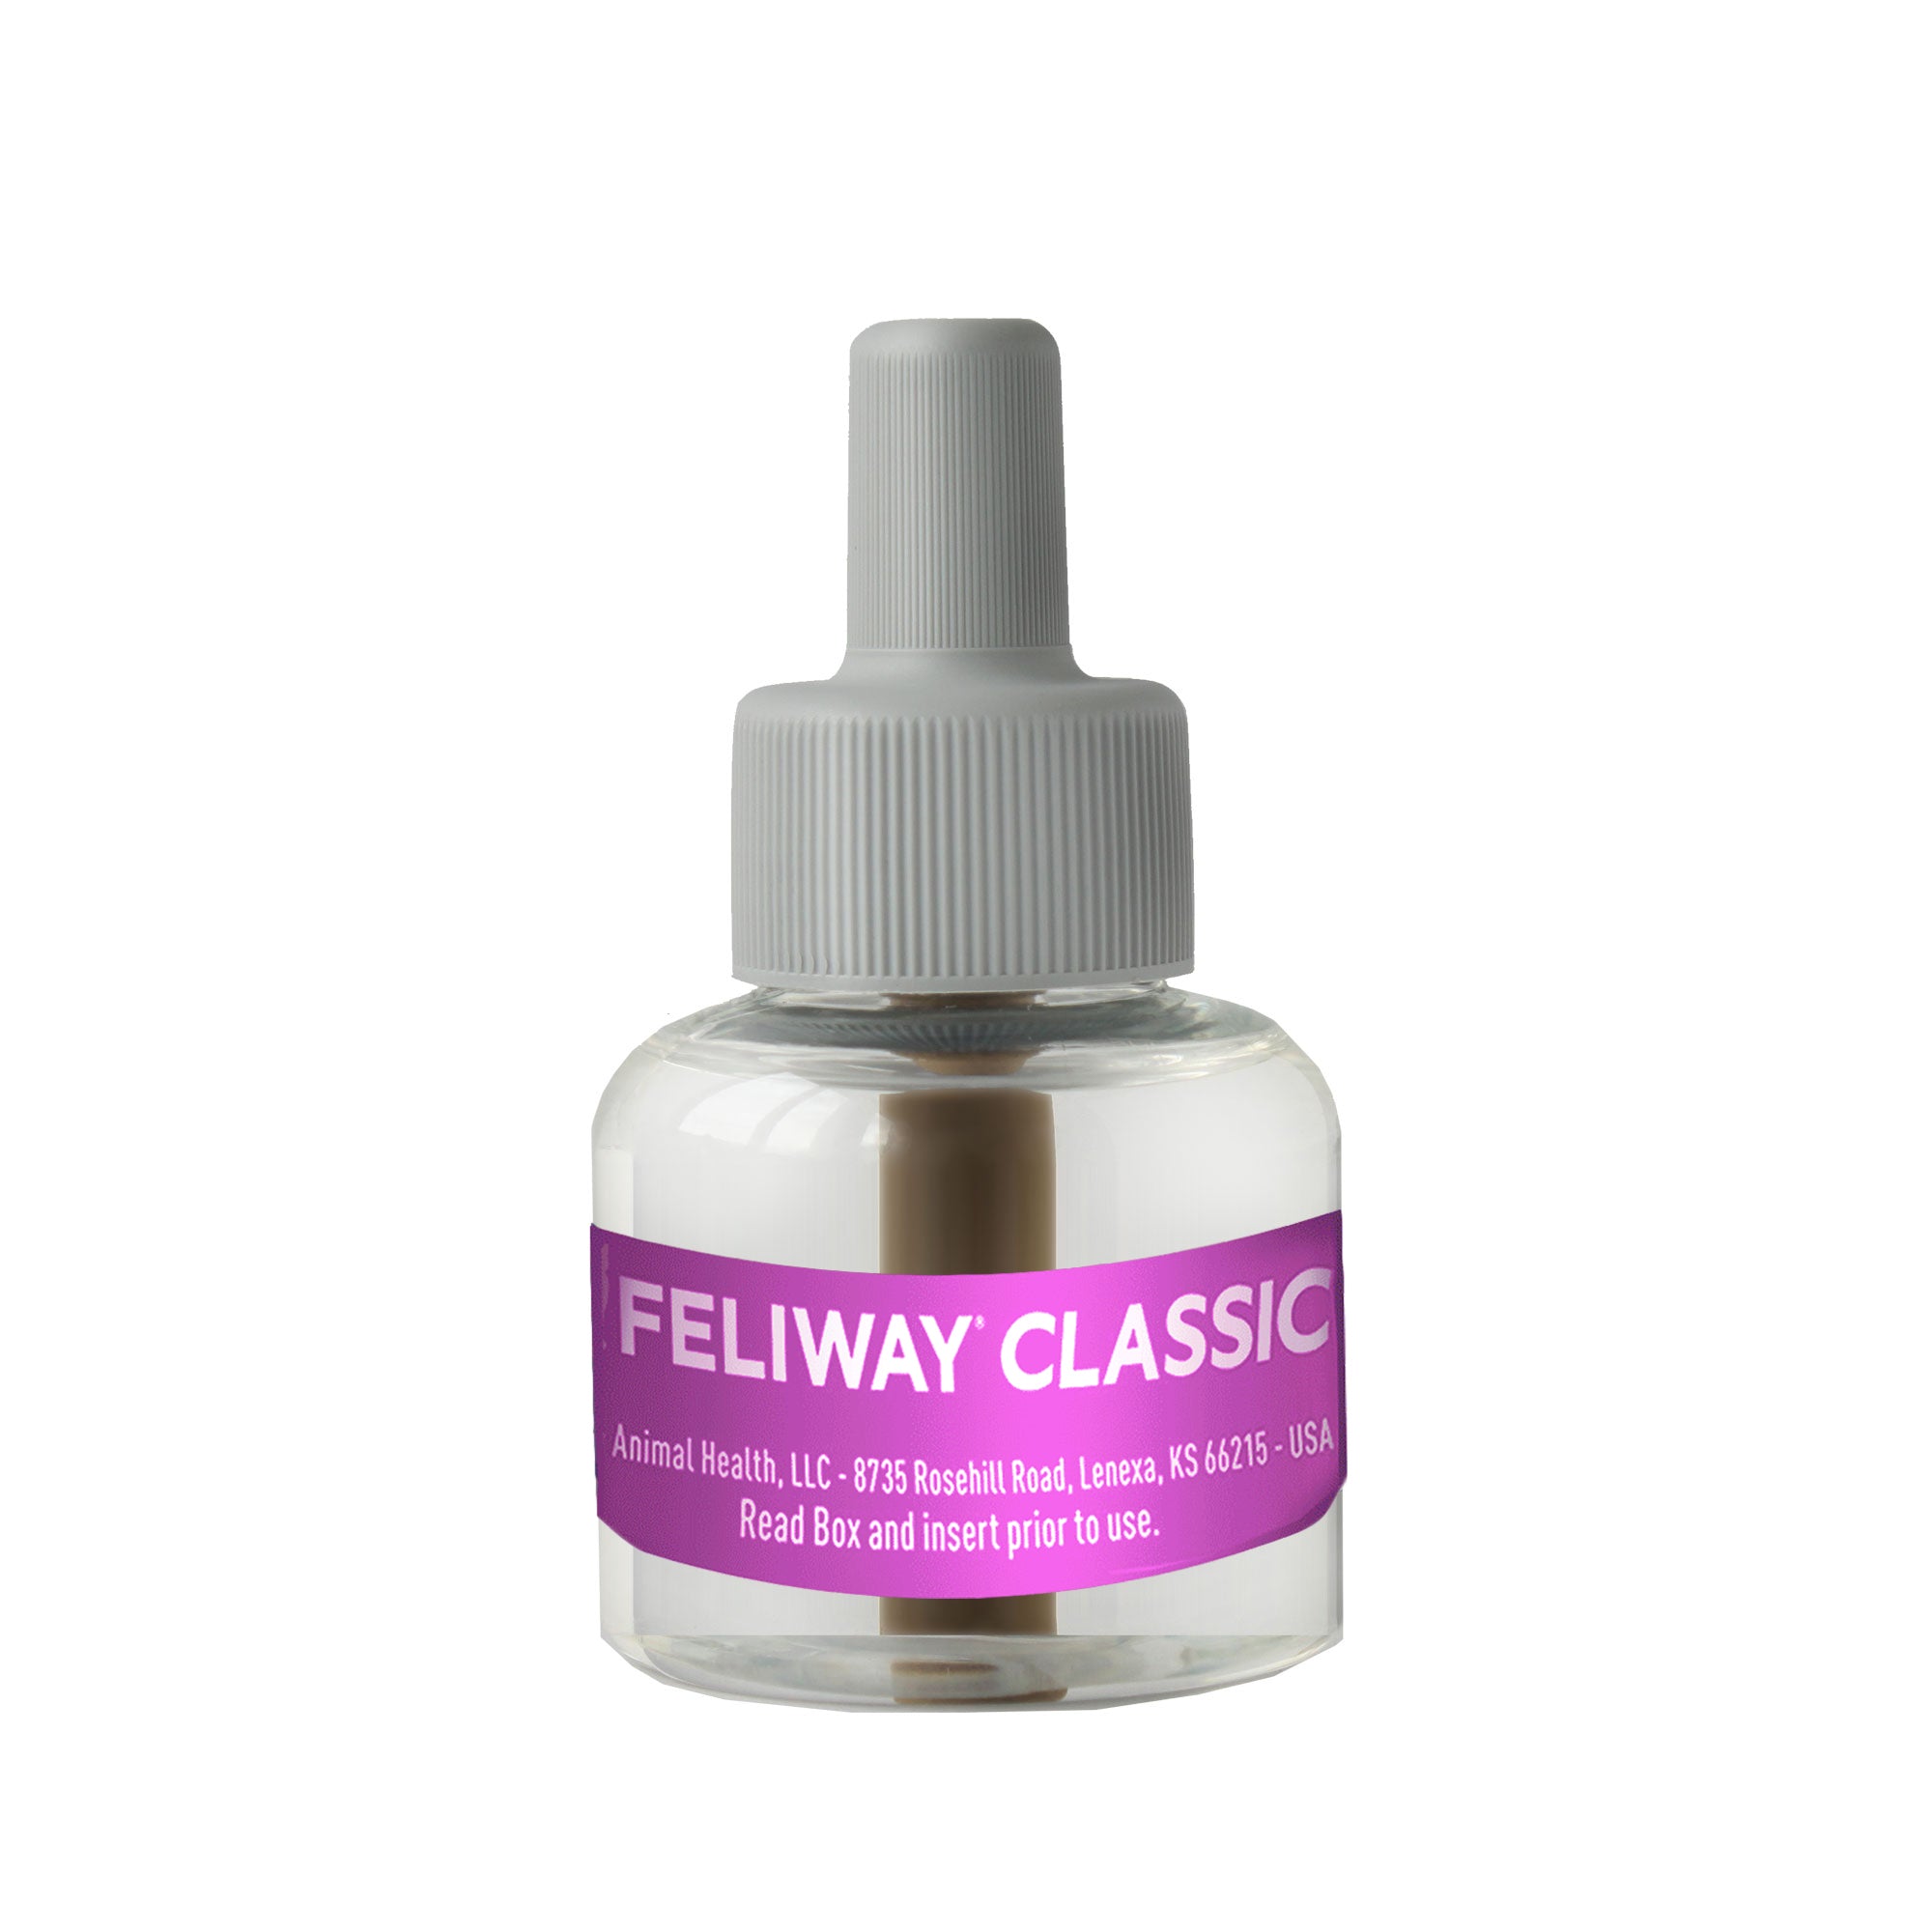 Feliway 30 Day Diffuser Refill for Cats, Pack of 2